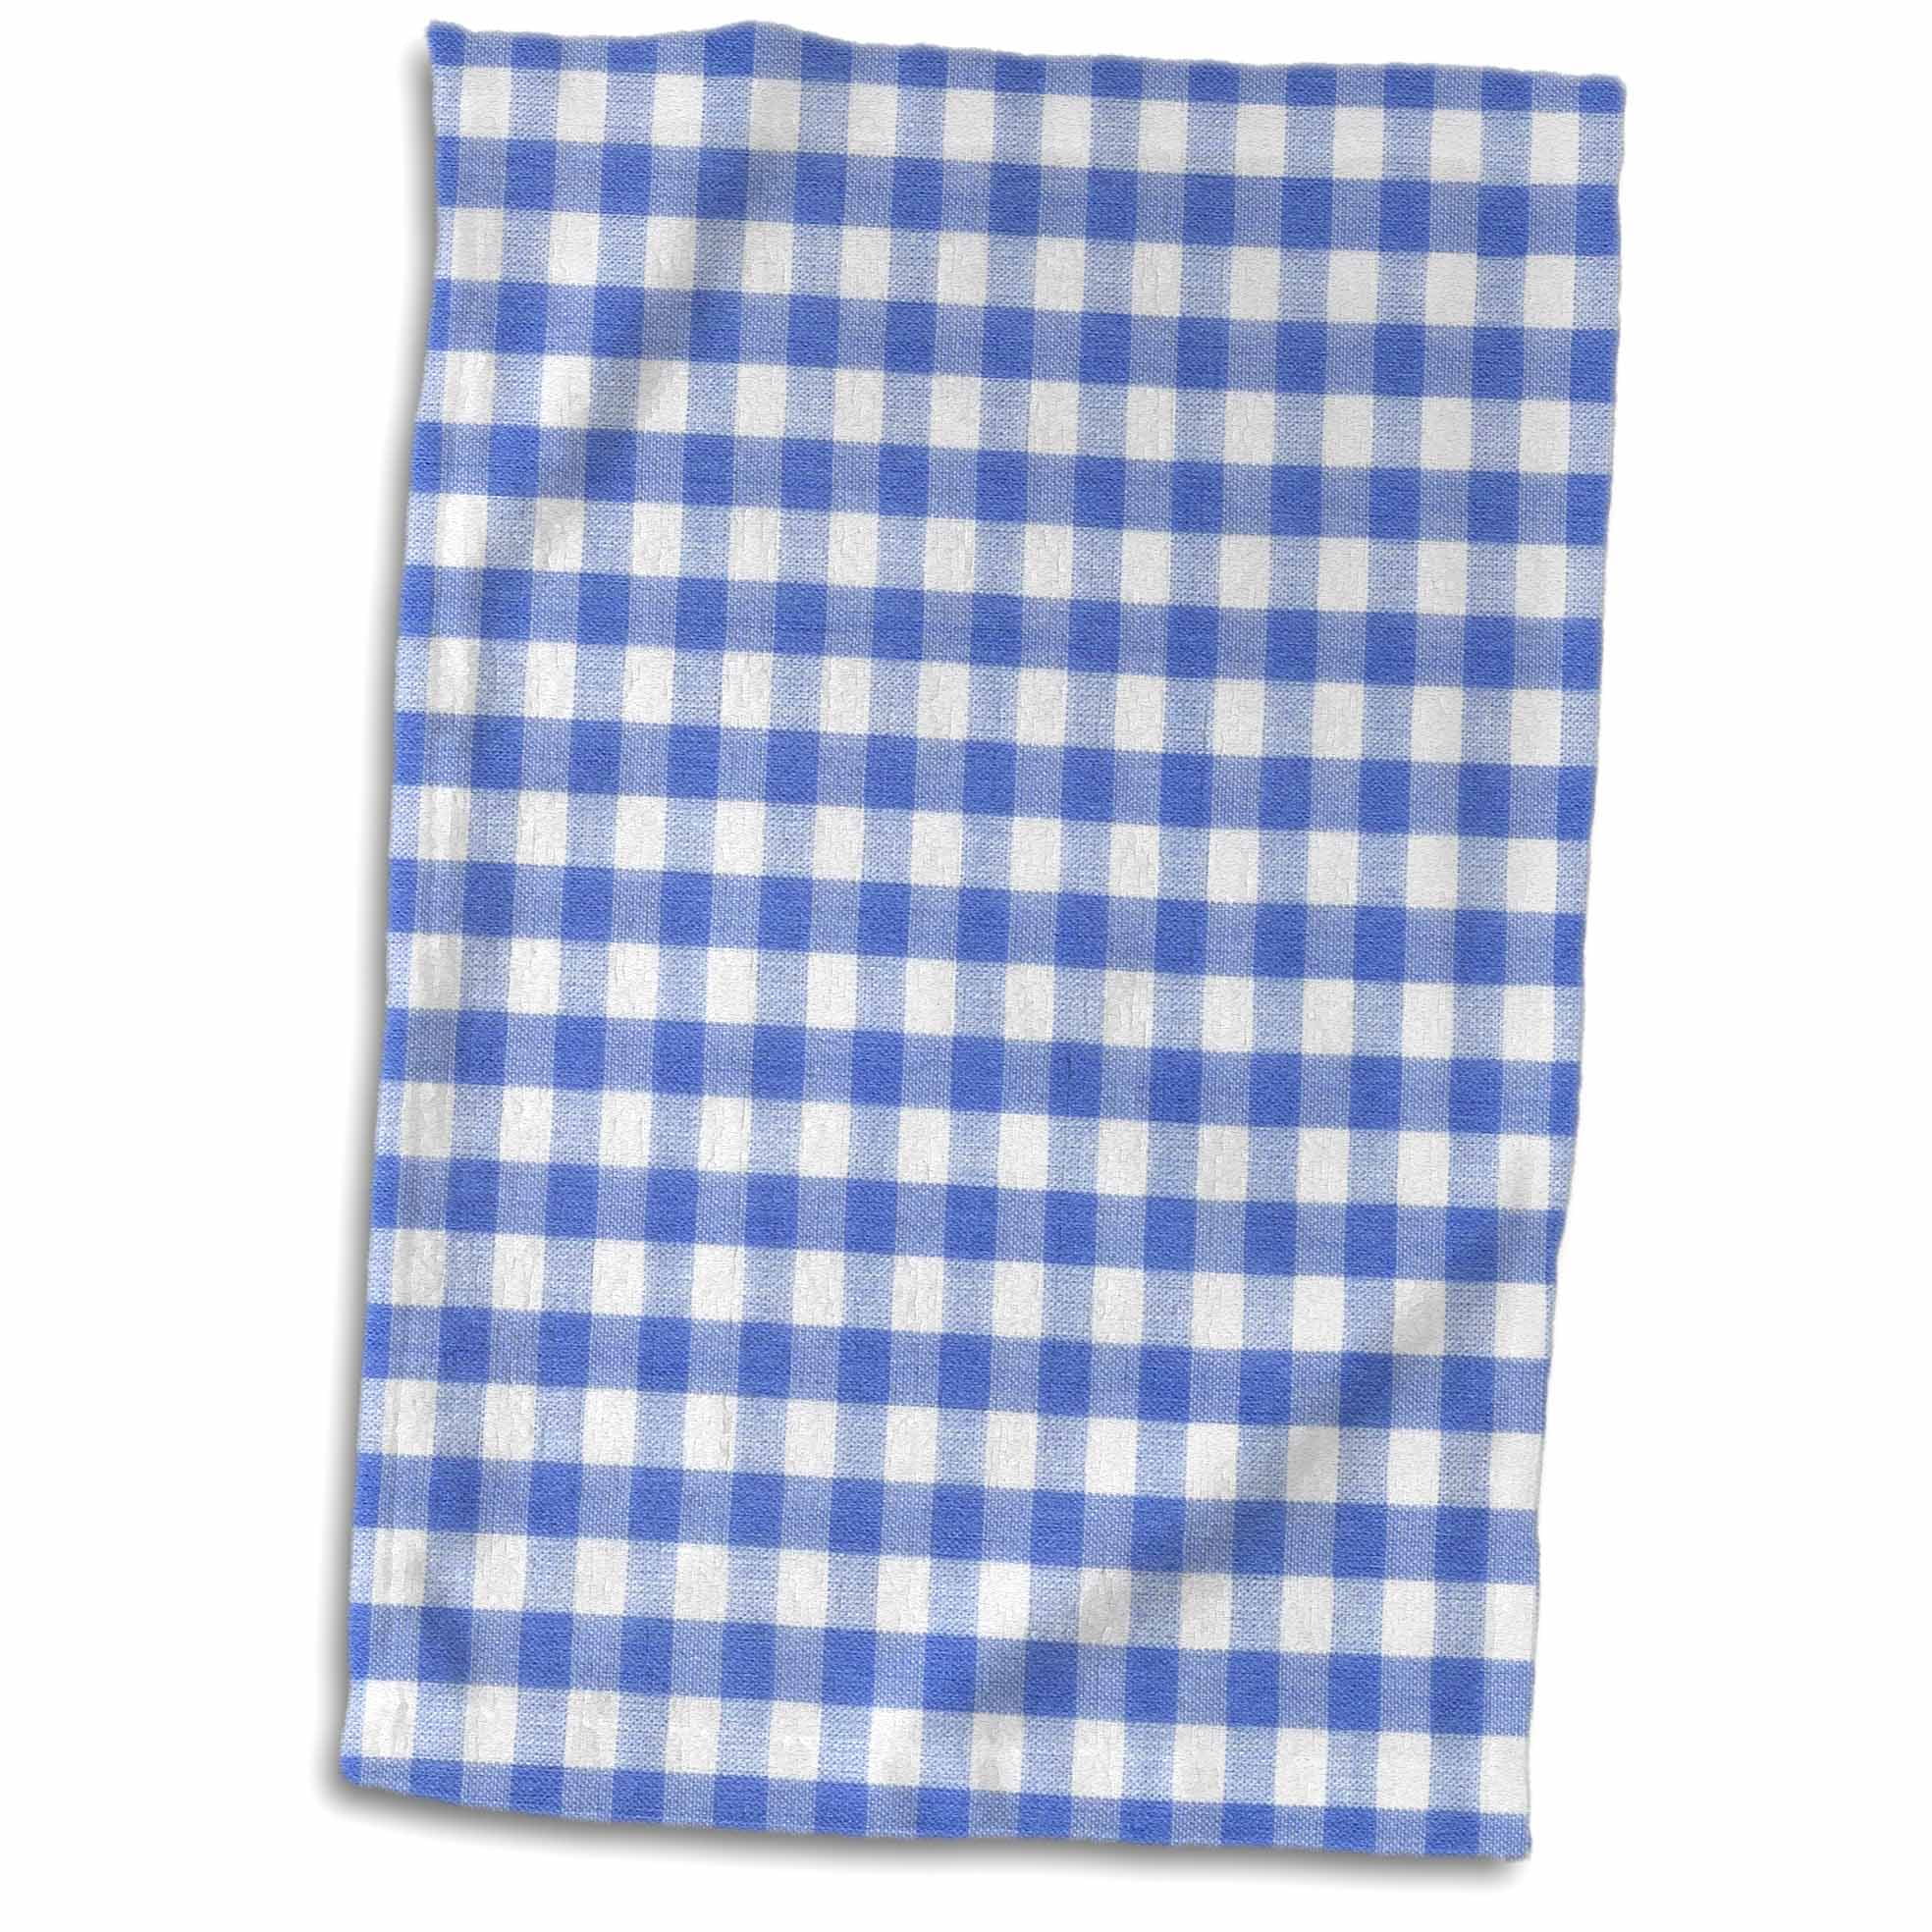 Soft Coasters cute navy retro checks checkered checked kitchen dining theme 3dRose Dark Blue and white Gingham pattern set of 8